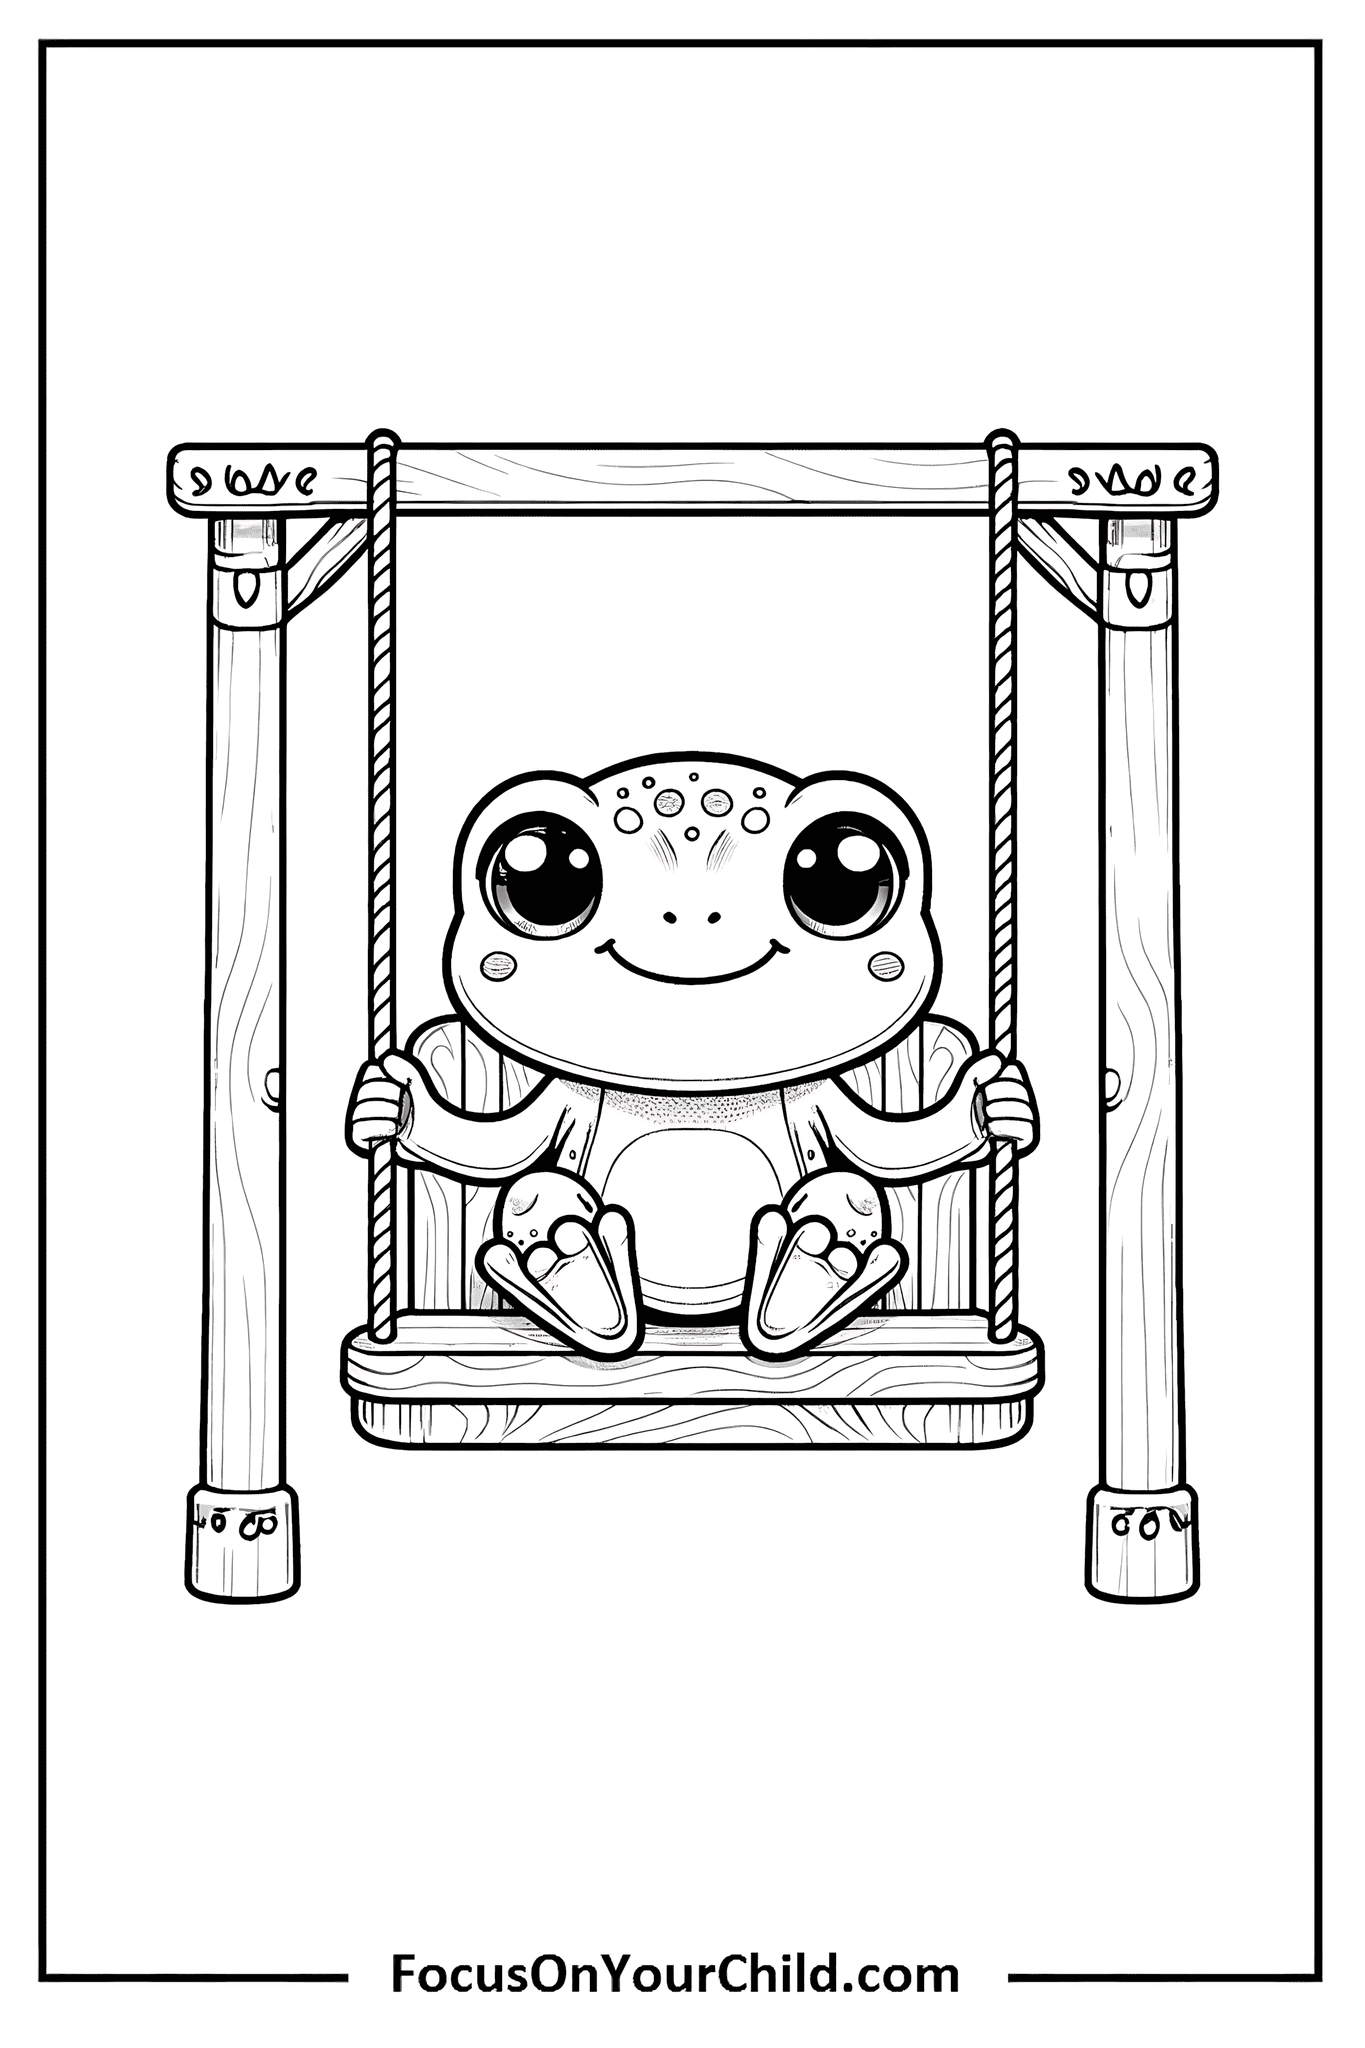 Adorable frog character sitting on wooden swing, perfect for child-friendly activities.